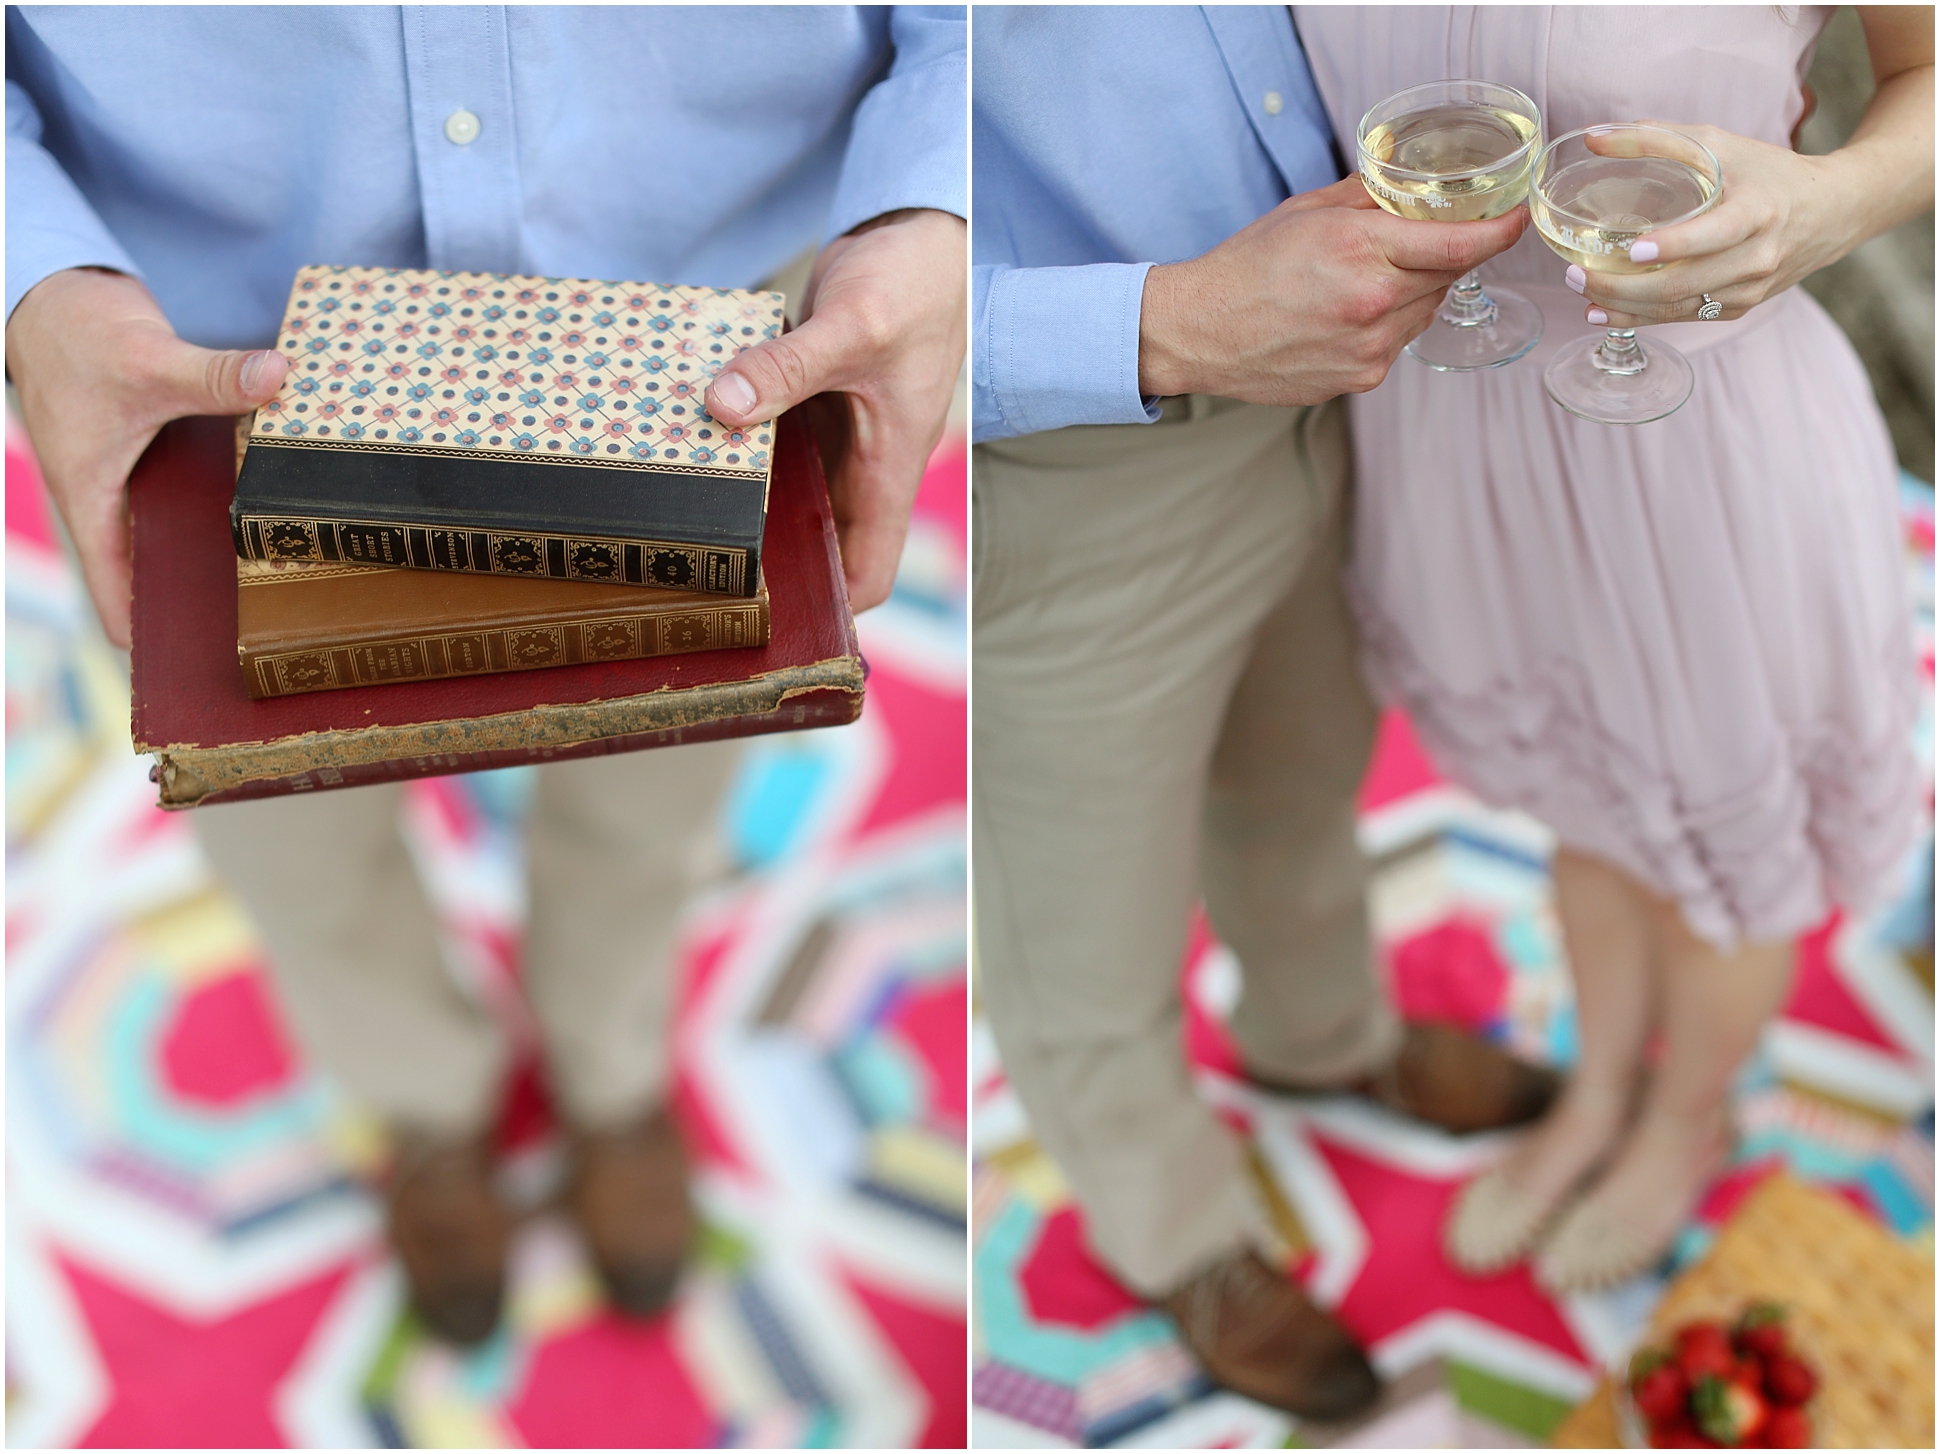 Picnic Inspired Engagement Session | Two Chics Photography | www.twochicsphotography.com